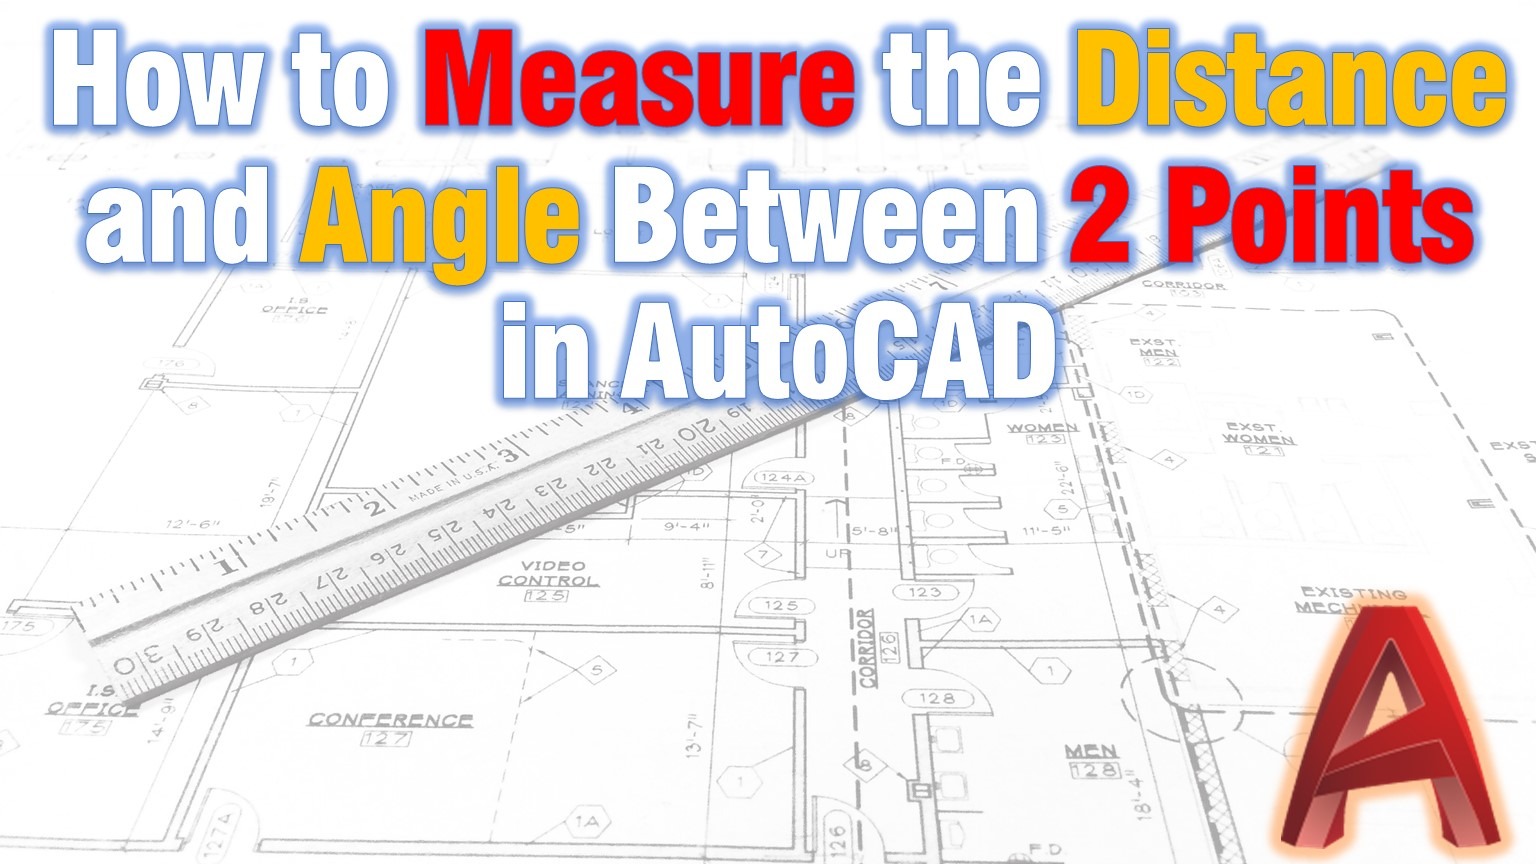 Distance and angle between points